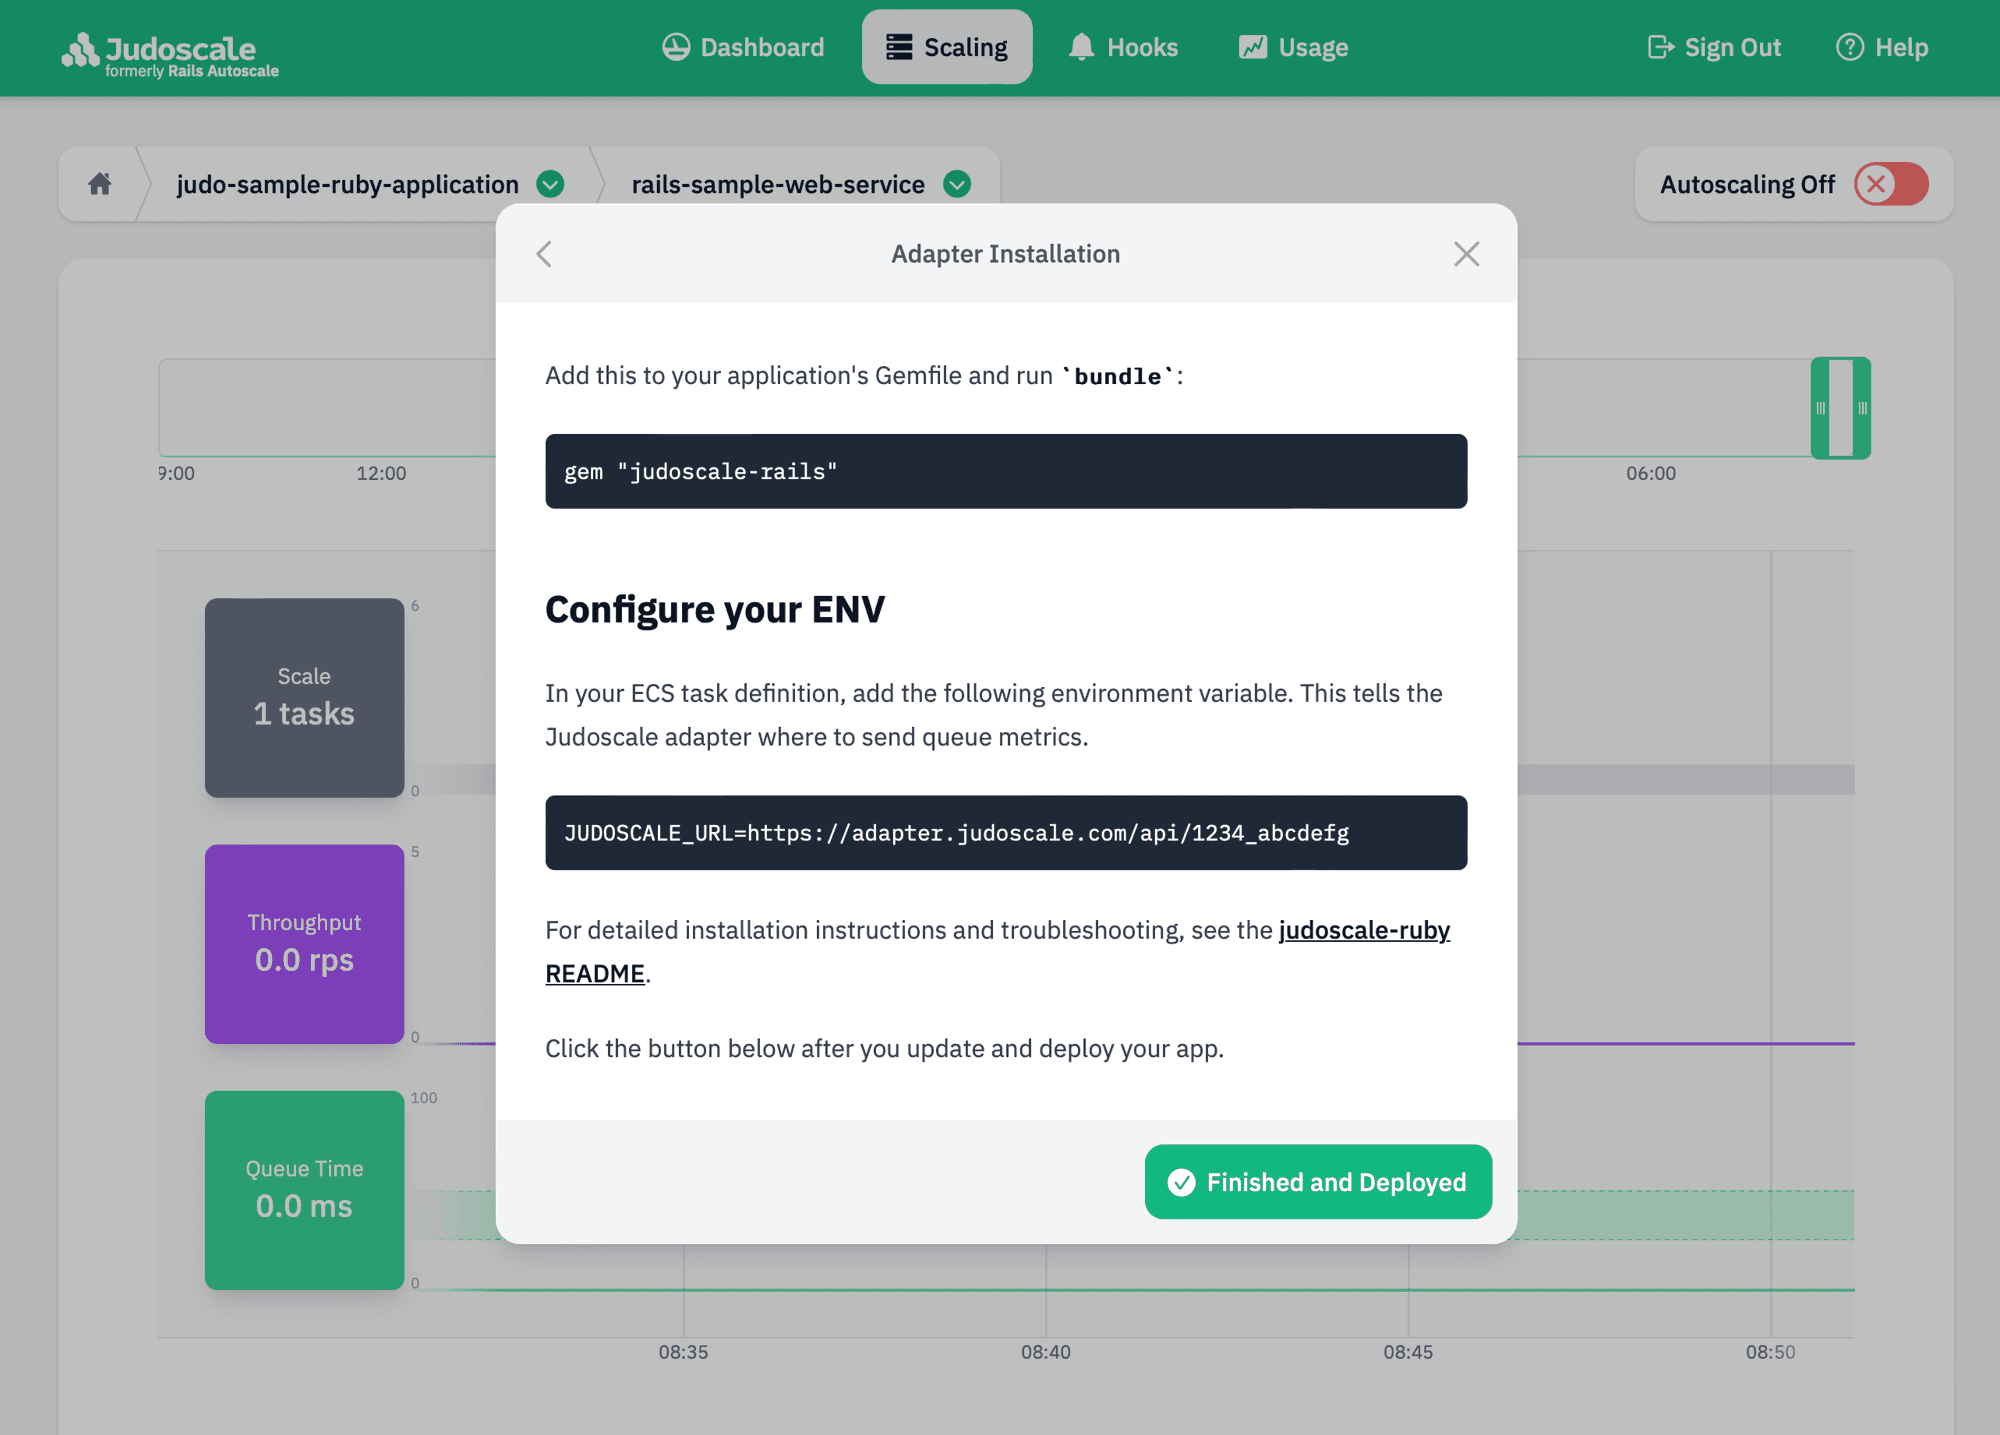 Screenshot of the Judoscale UI prompting the user to setup and install a unique ENV key and value